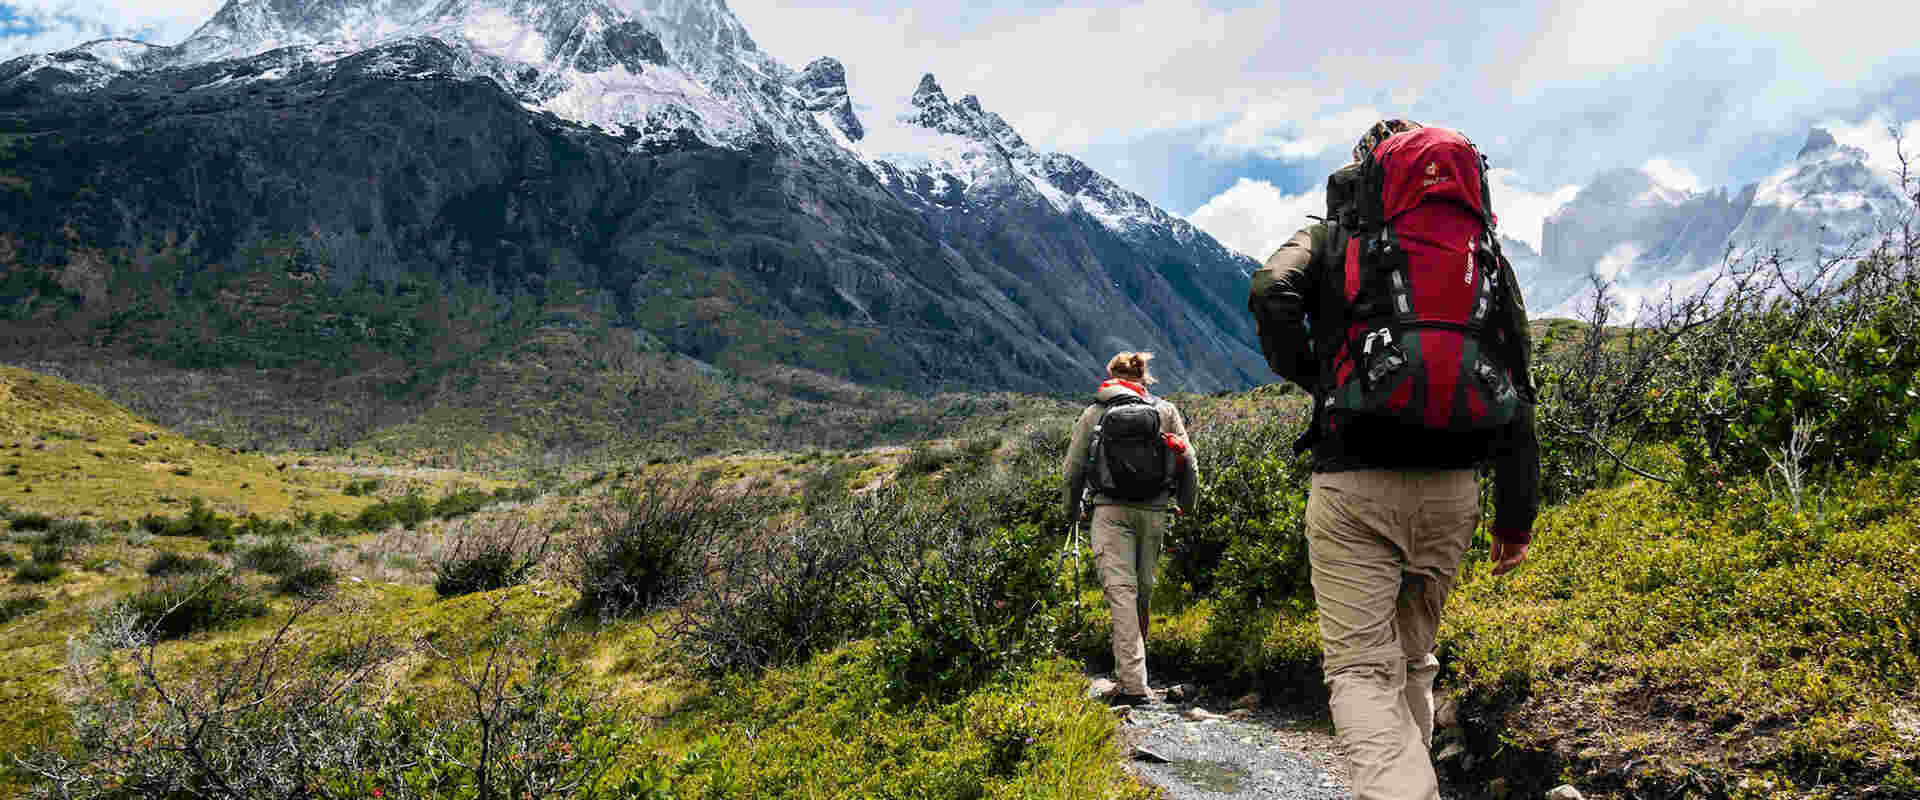 Two people hikking mountains with Hiking GPS tracker